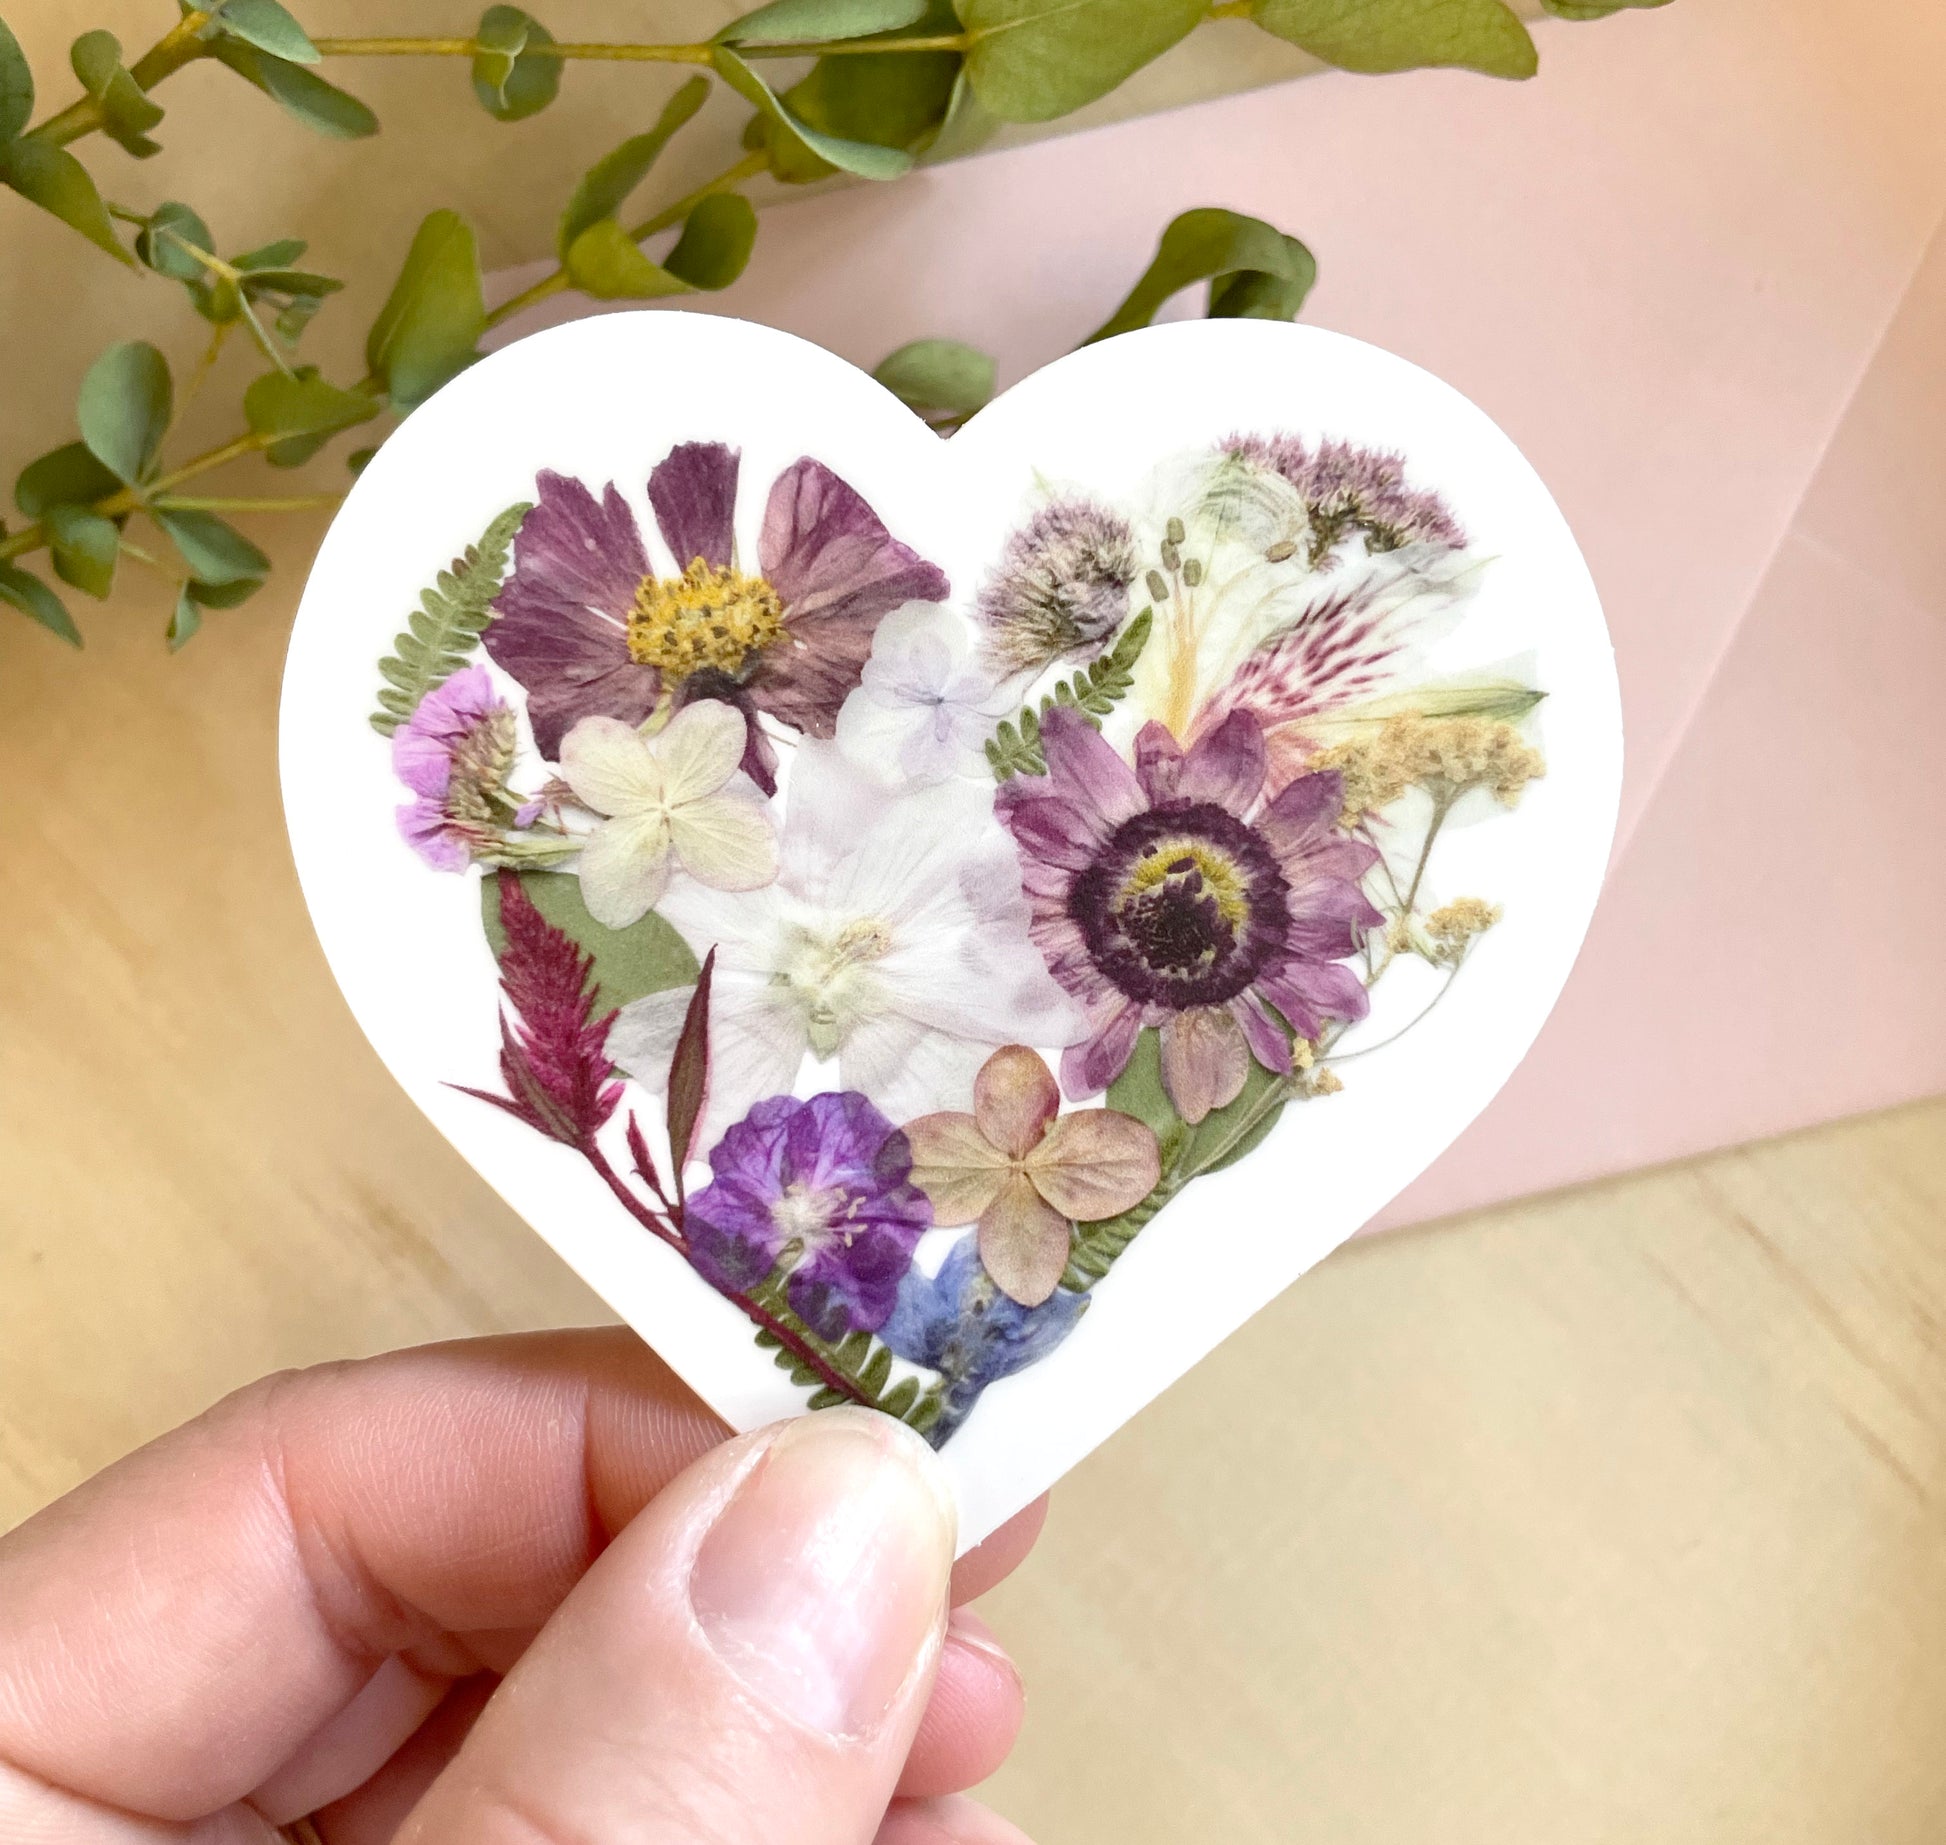 sticker of floral heart made with dried pressed flowers. 